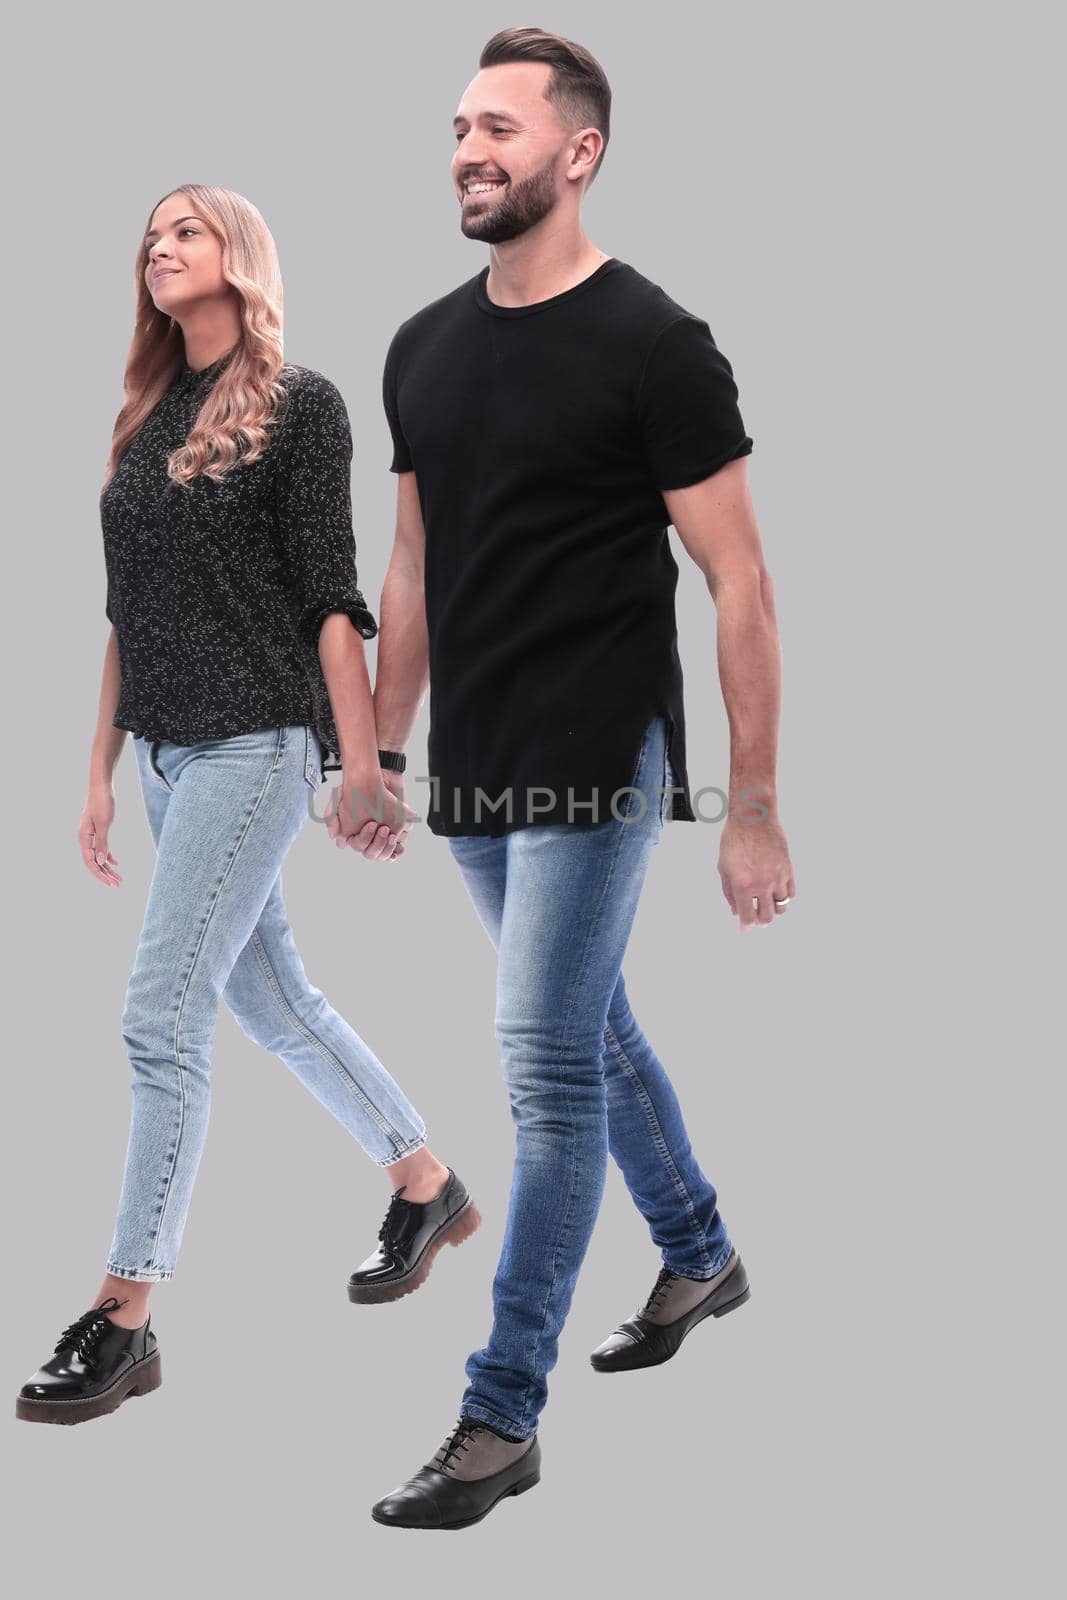 in full growth. young couple walking together . isolated on white background